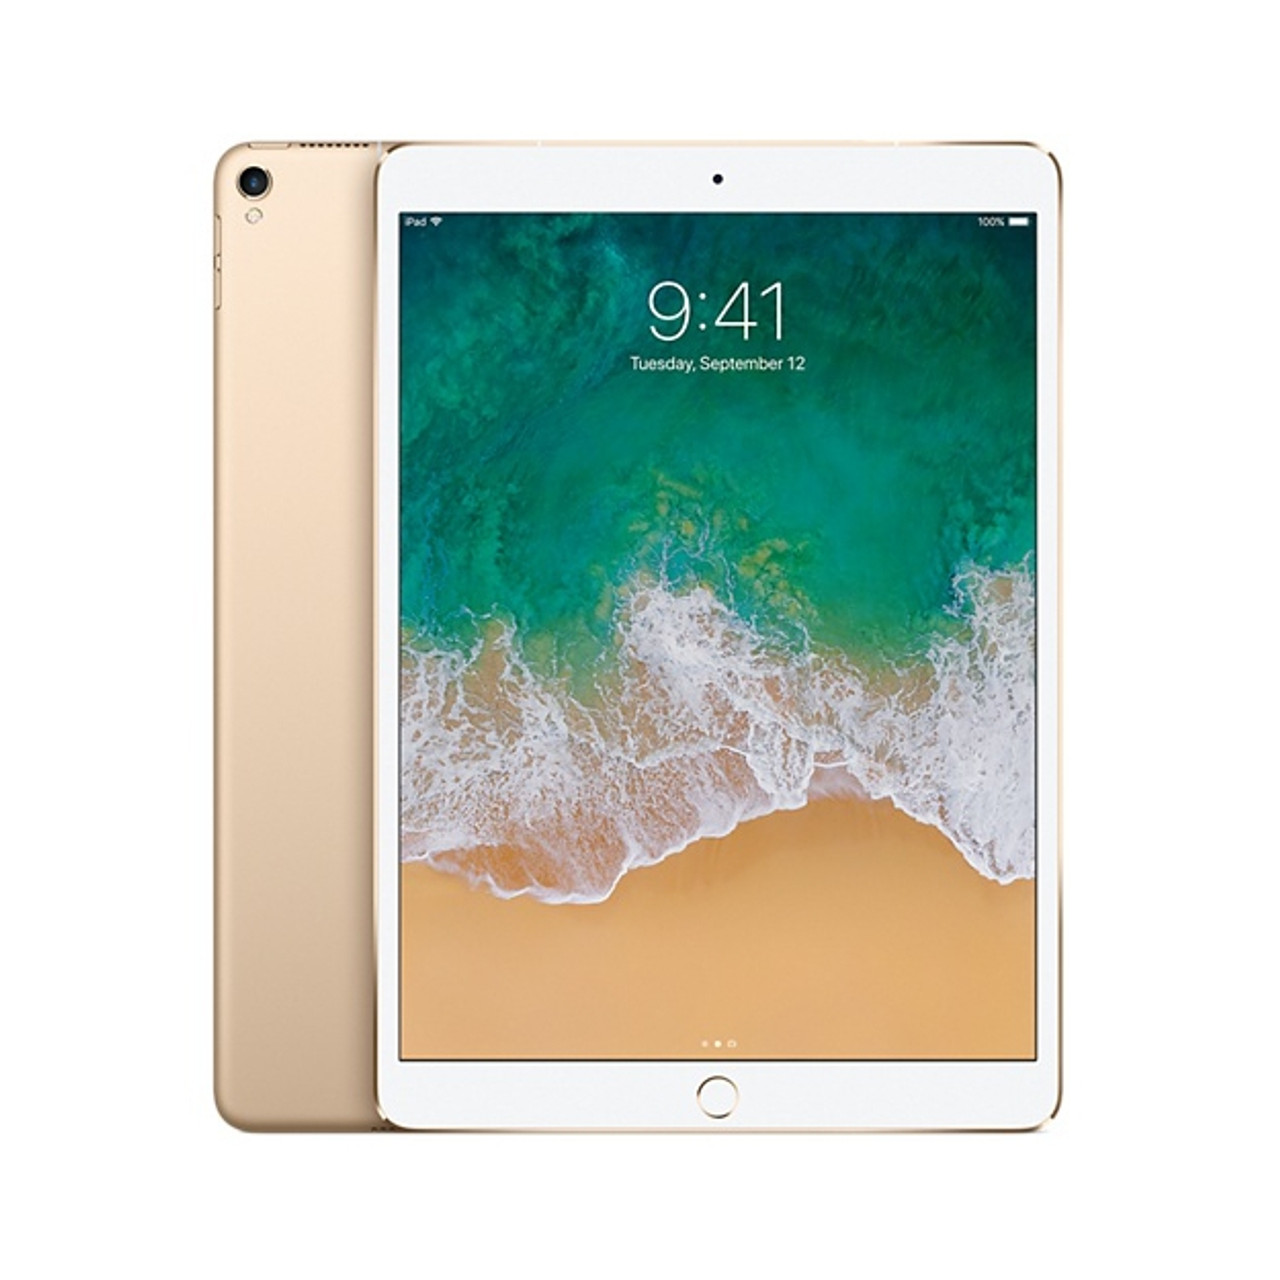 Apple iPad Pro 10.5-inch Wi-Fi + Cellular (Unlocked) 256GB - Gold MPHW2LL/A  - Very Good Condition